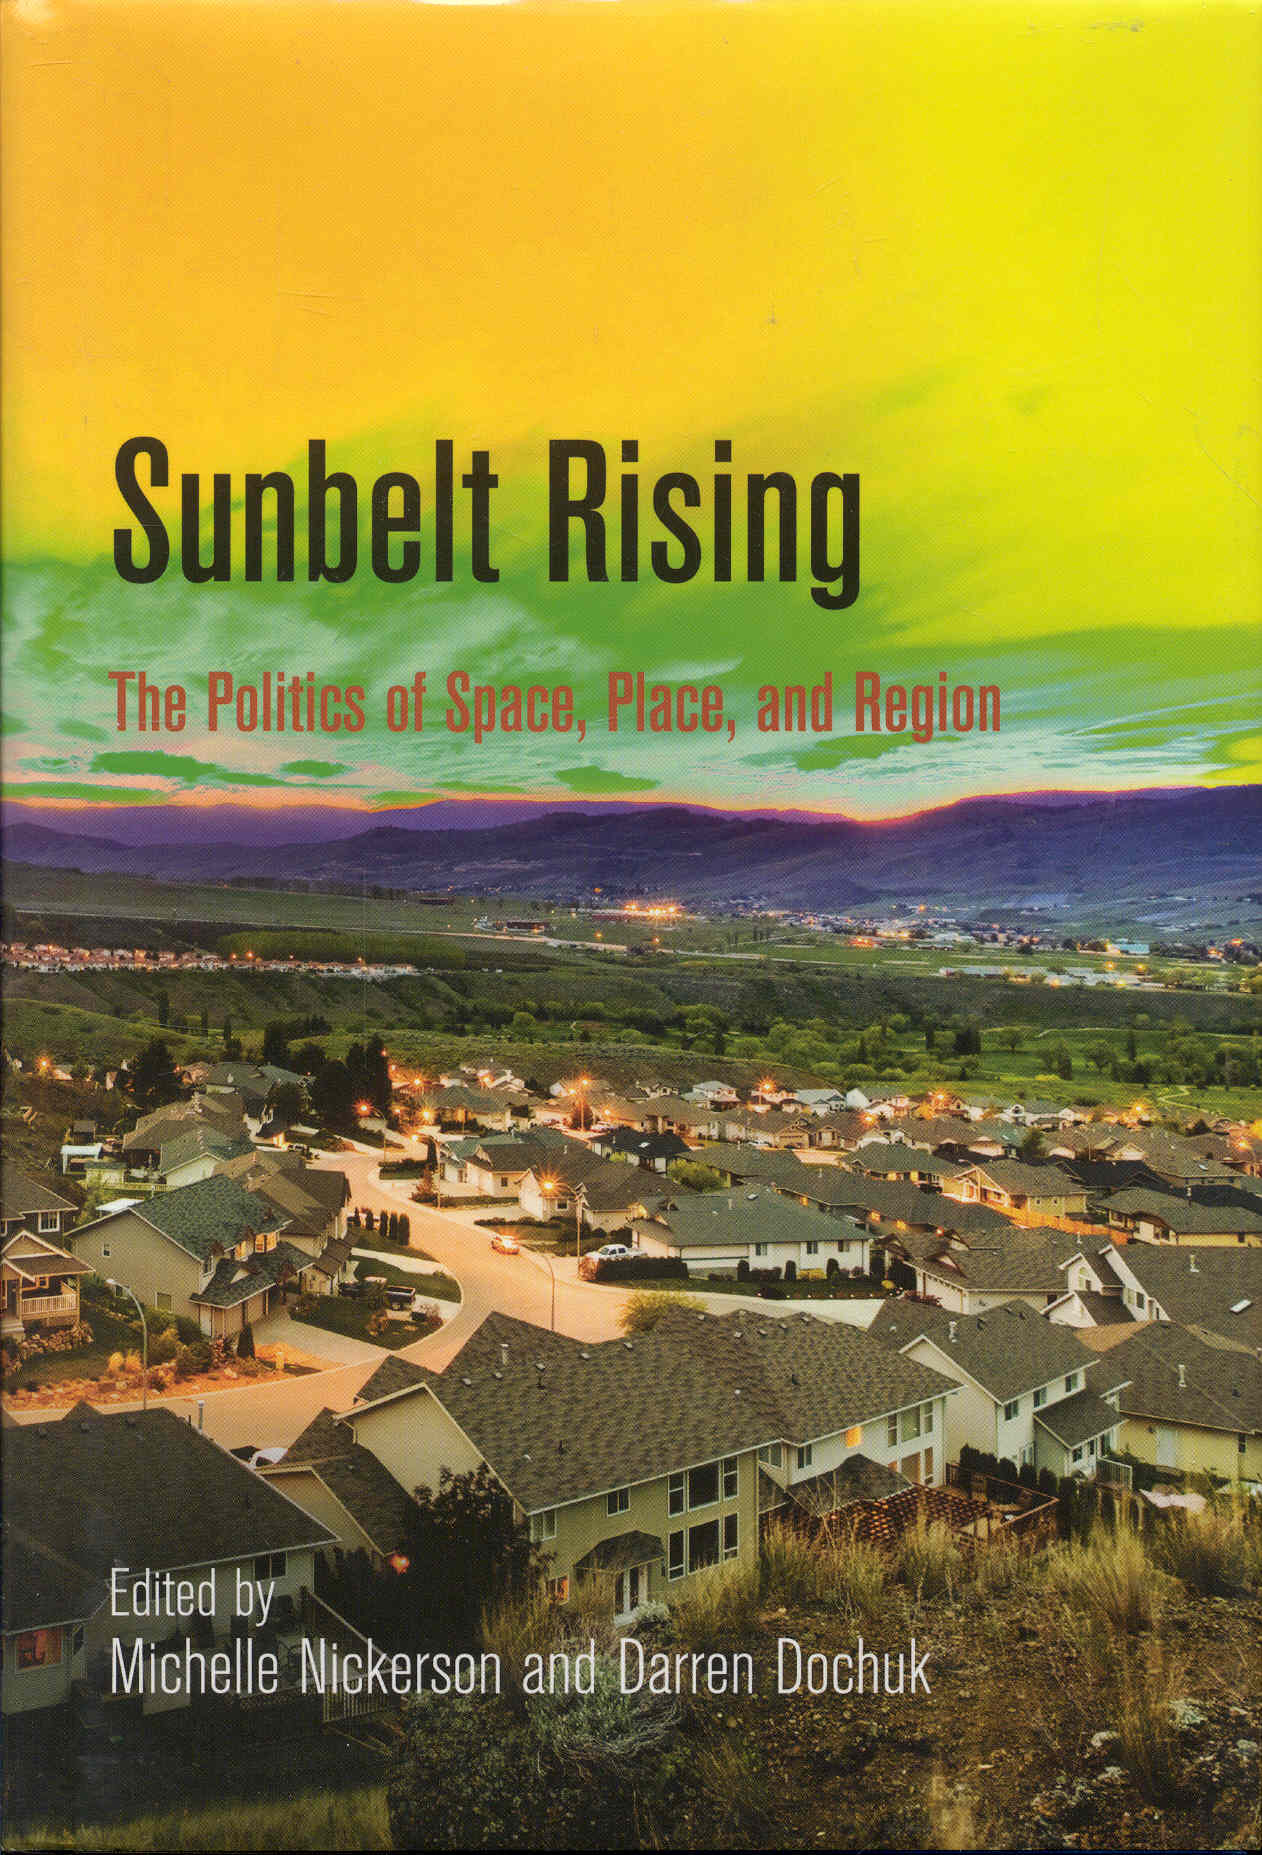 Sunbelt Rising: The Politics of Space, Place, and Region - Michelle Nickerson and Darren Dochuk (Edited by)